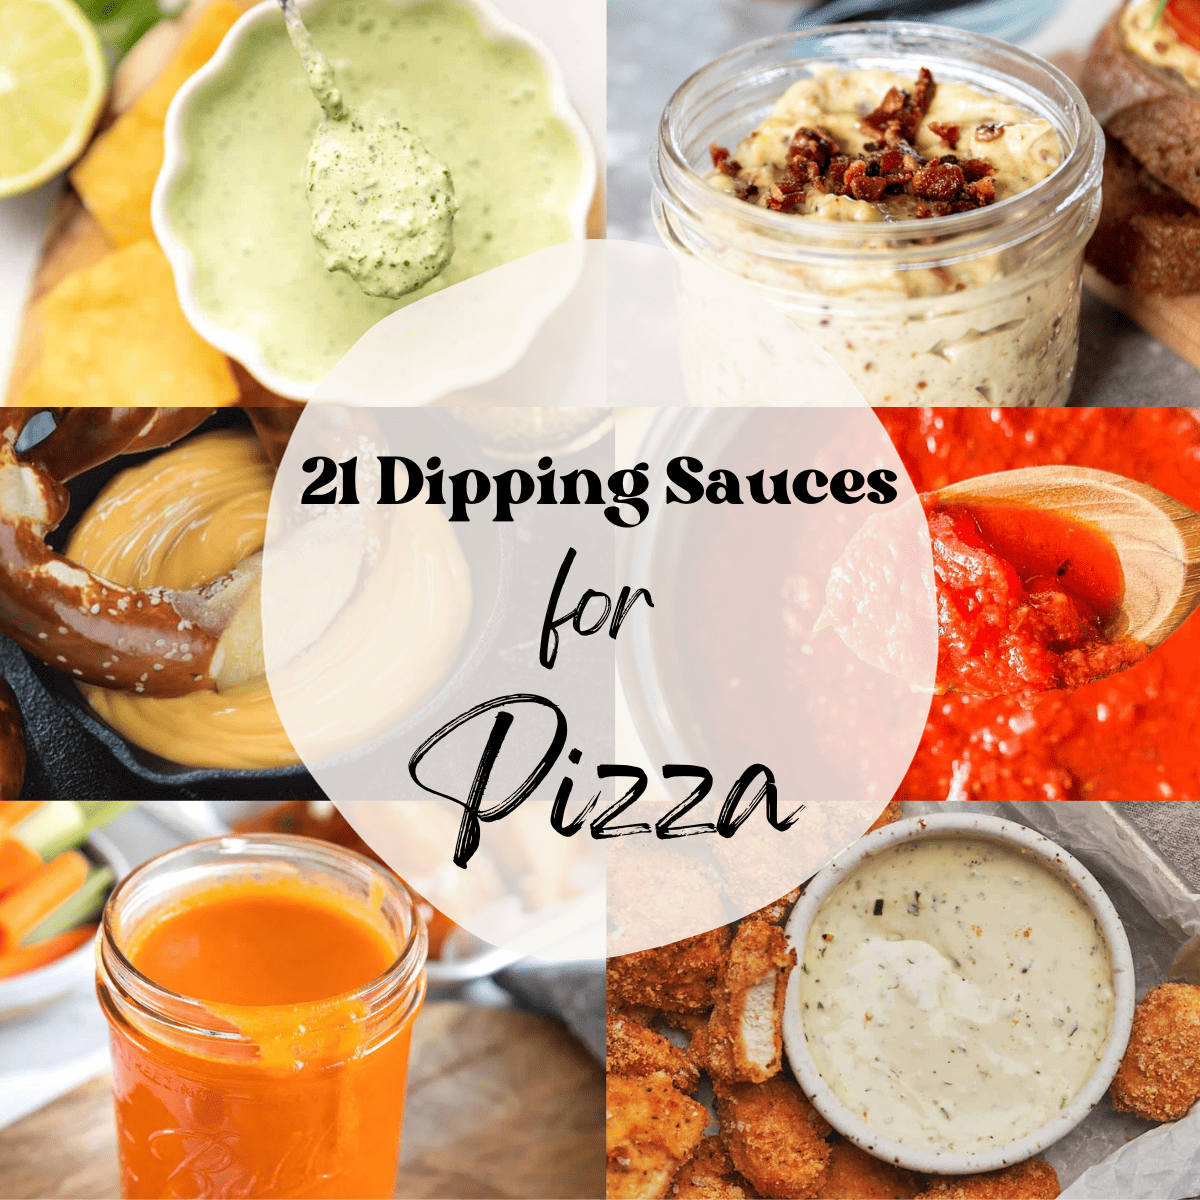 A 6 photo collage showing dipping sauces for pizza. 